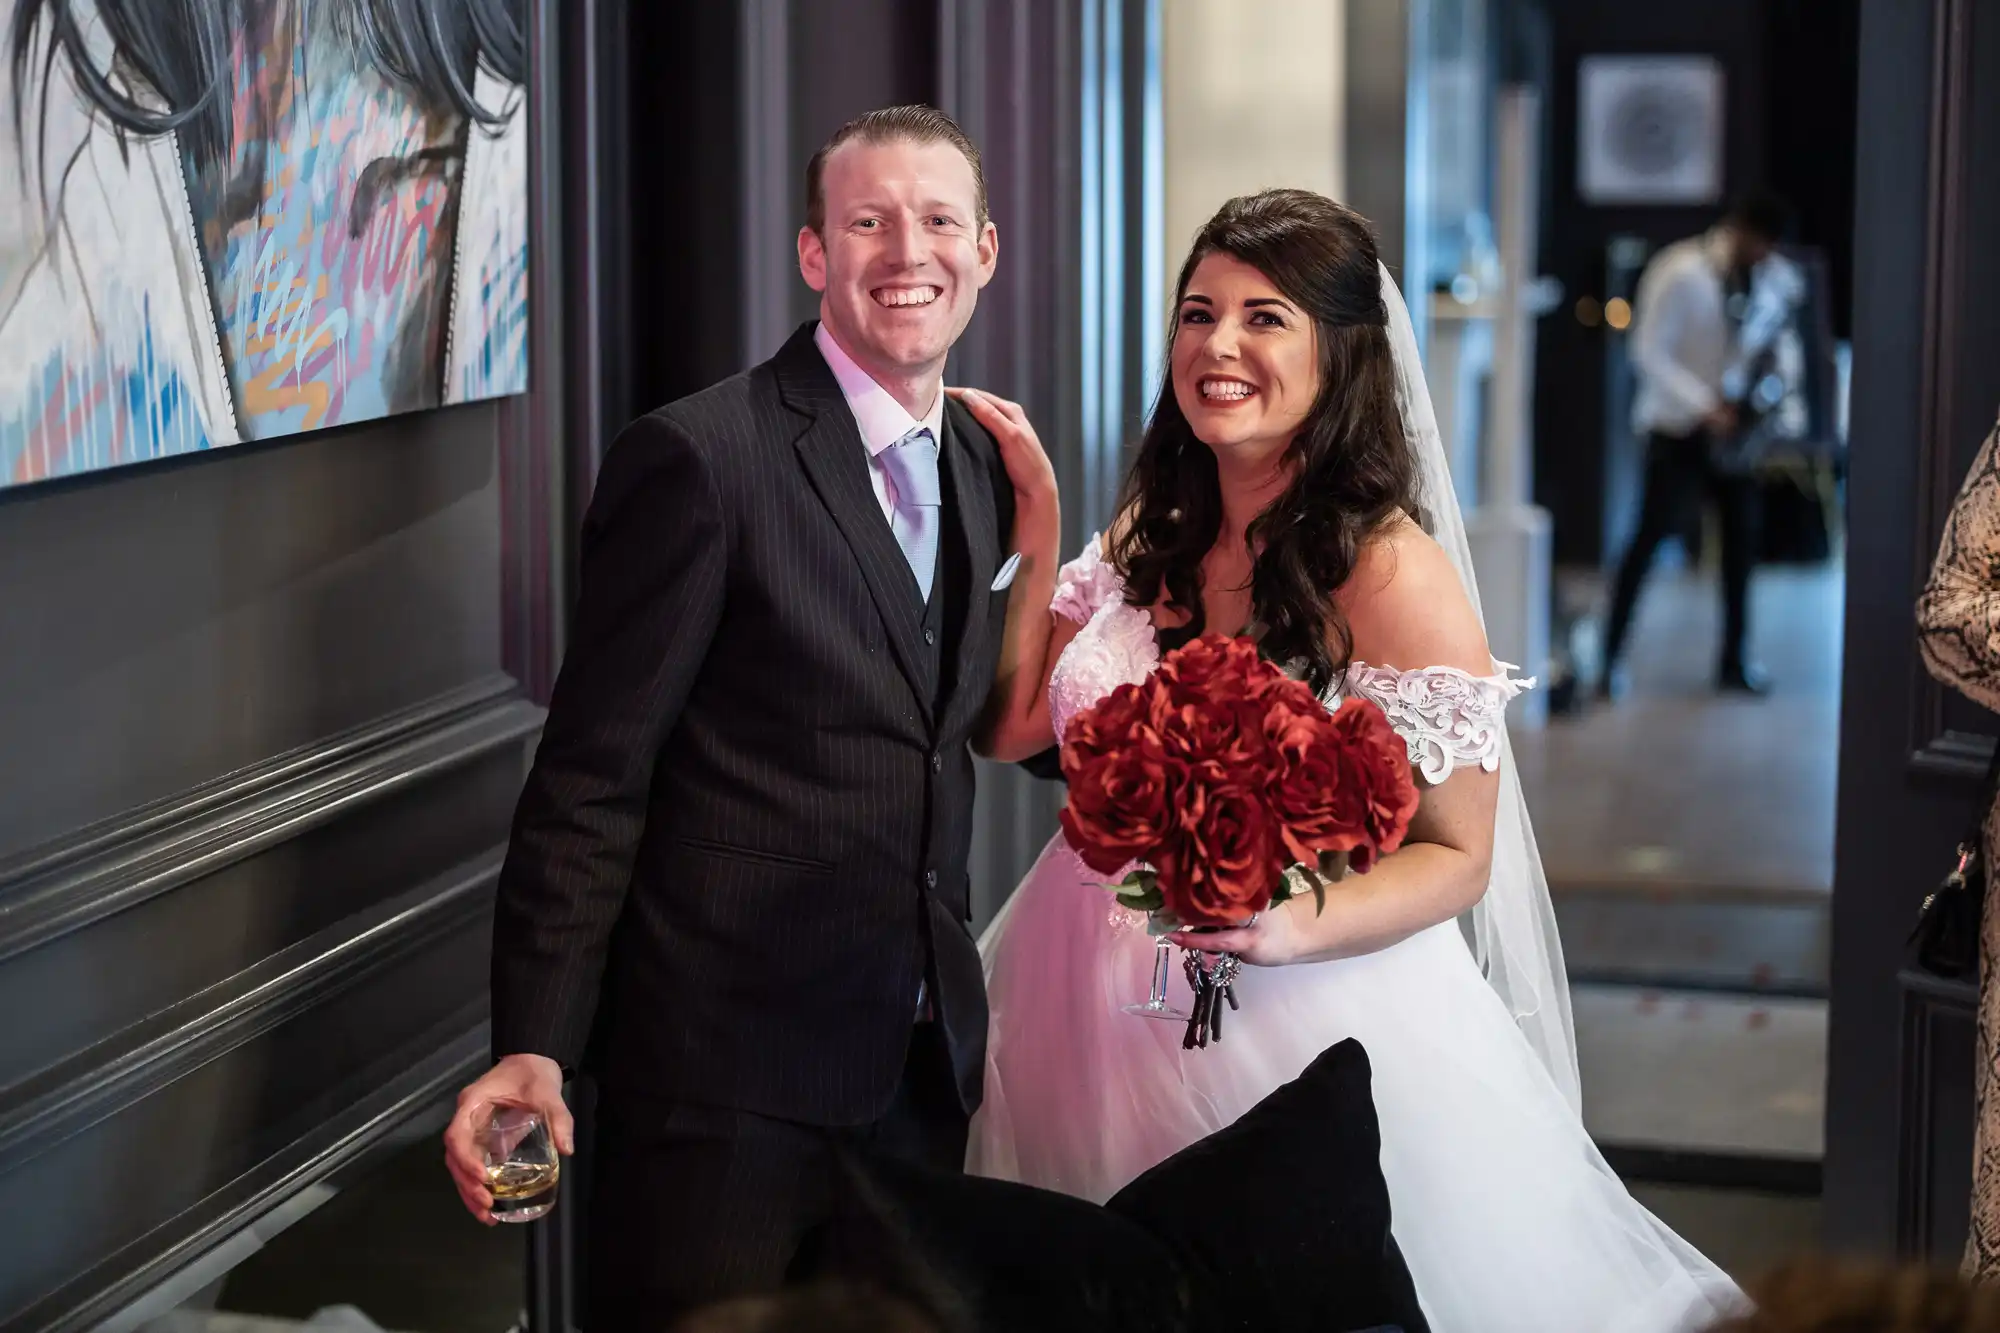 A couple, dressed in wedding attire, smiles at the camera. The bride holds a bouquet of red flowers, and the groom holds a drink. They are in an elegantly decorated room.